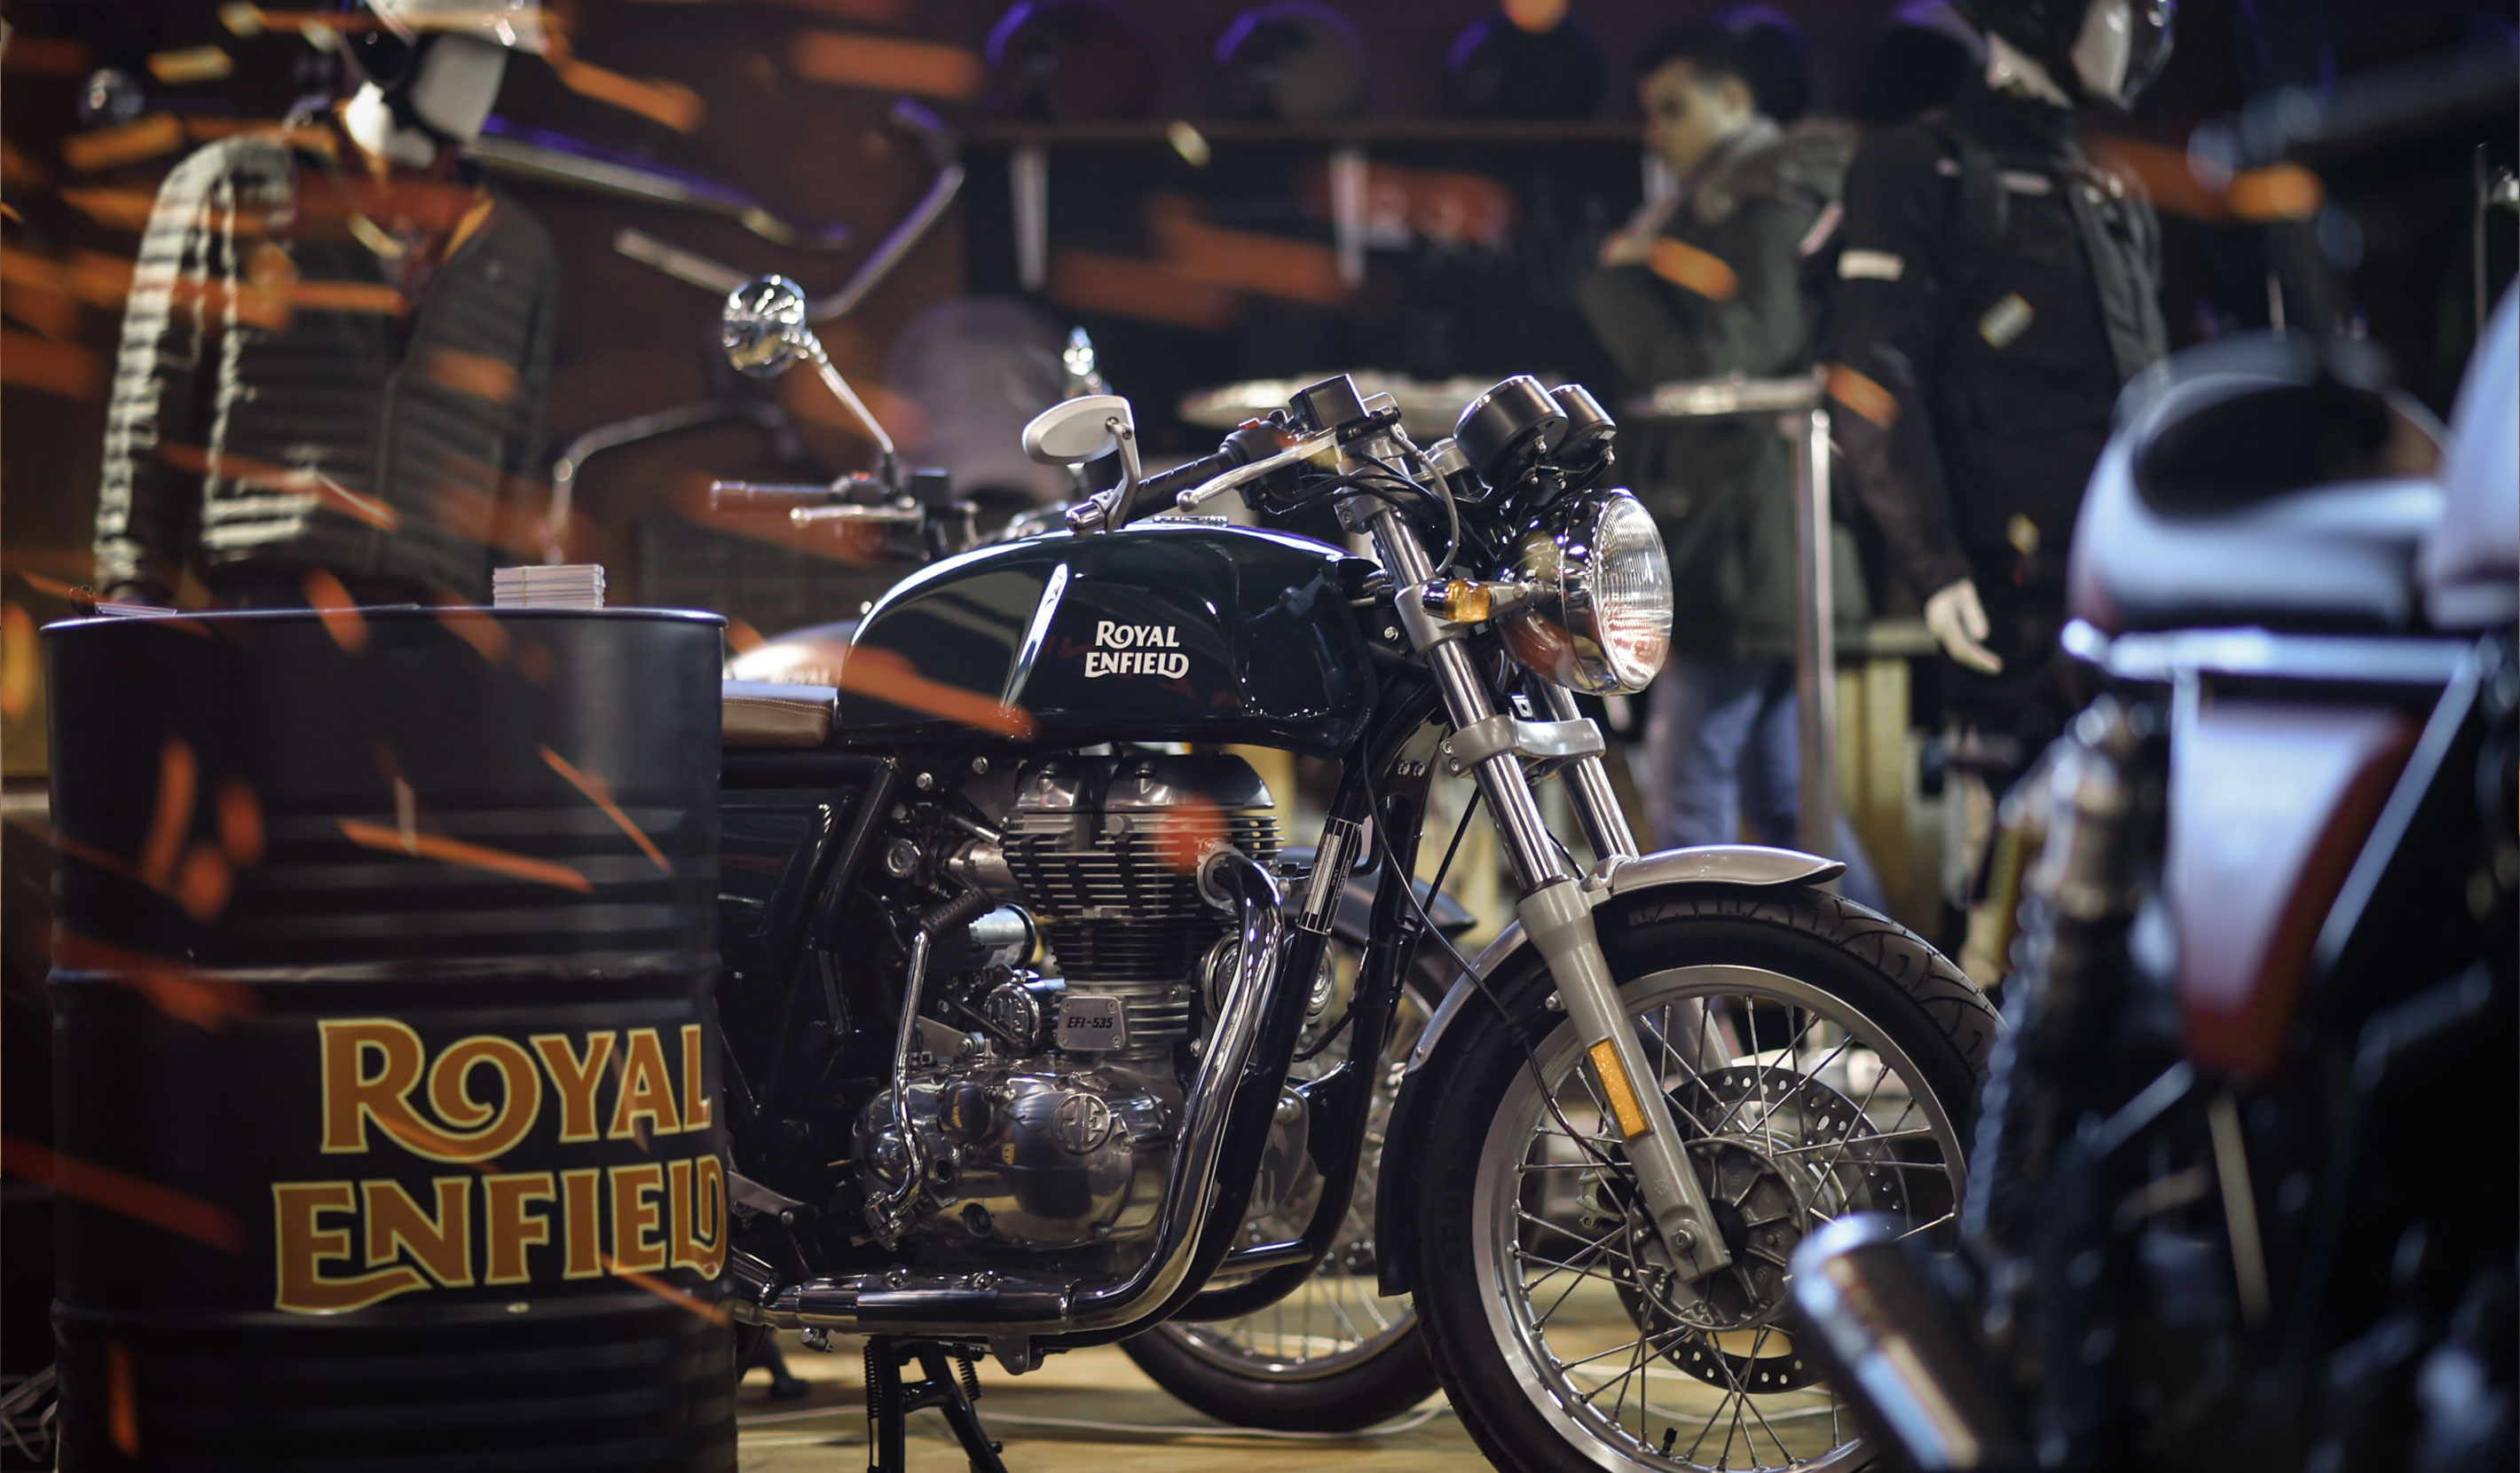 Space-worldwide-Royal Enfield exhibition trade show motorbike